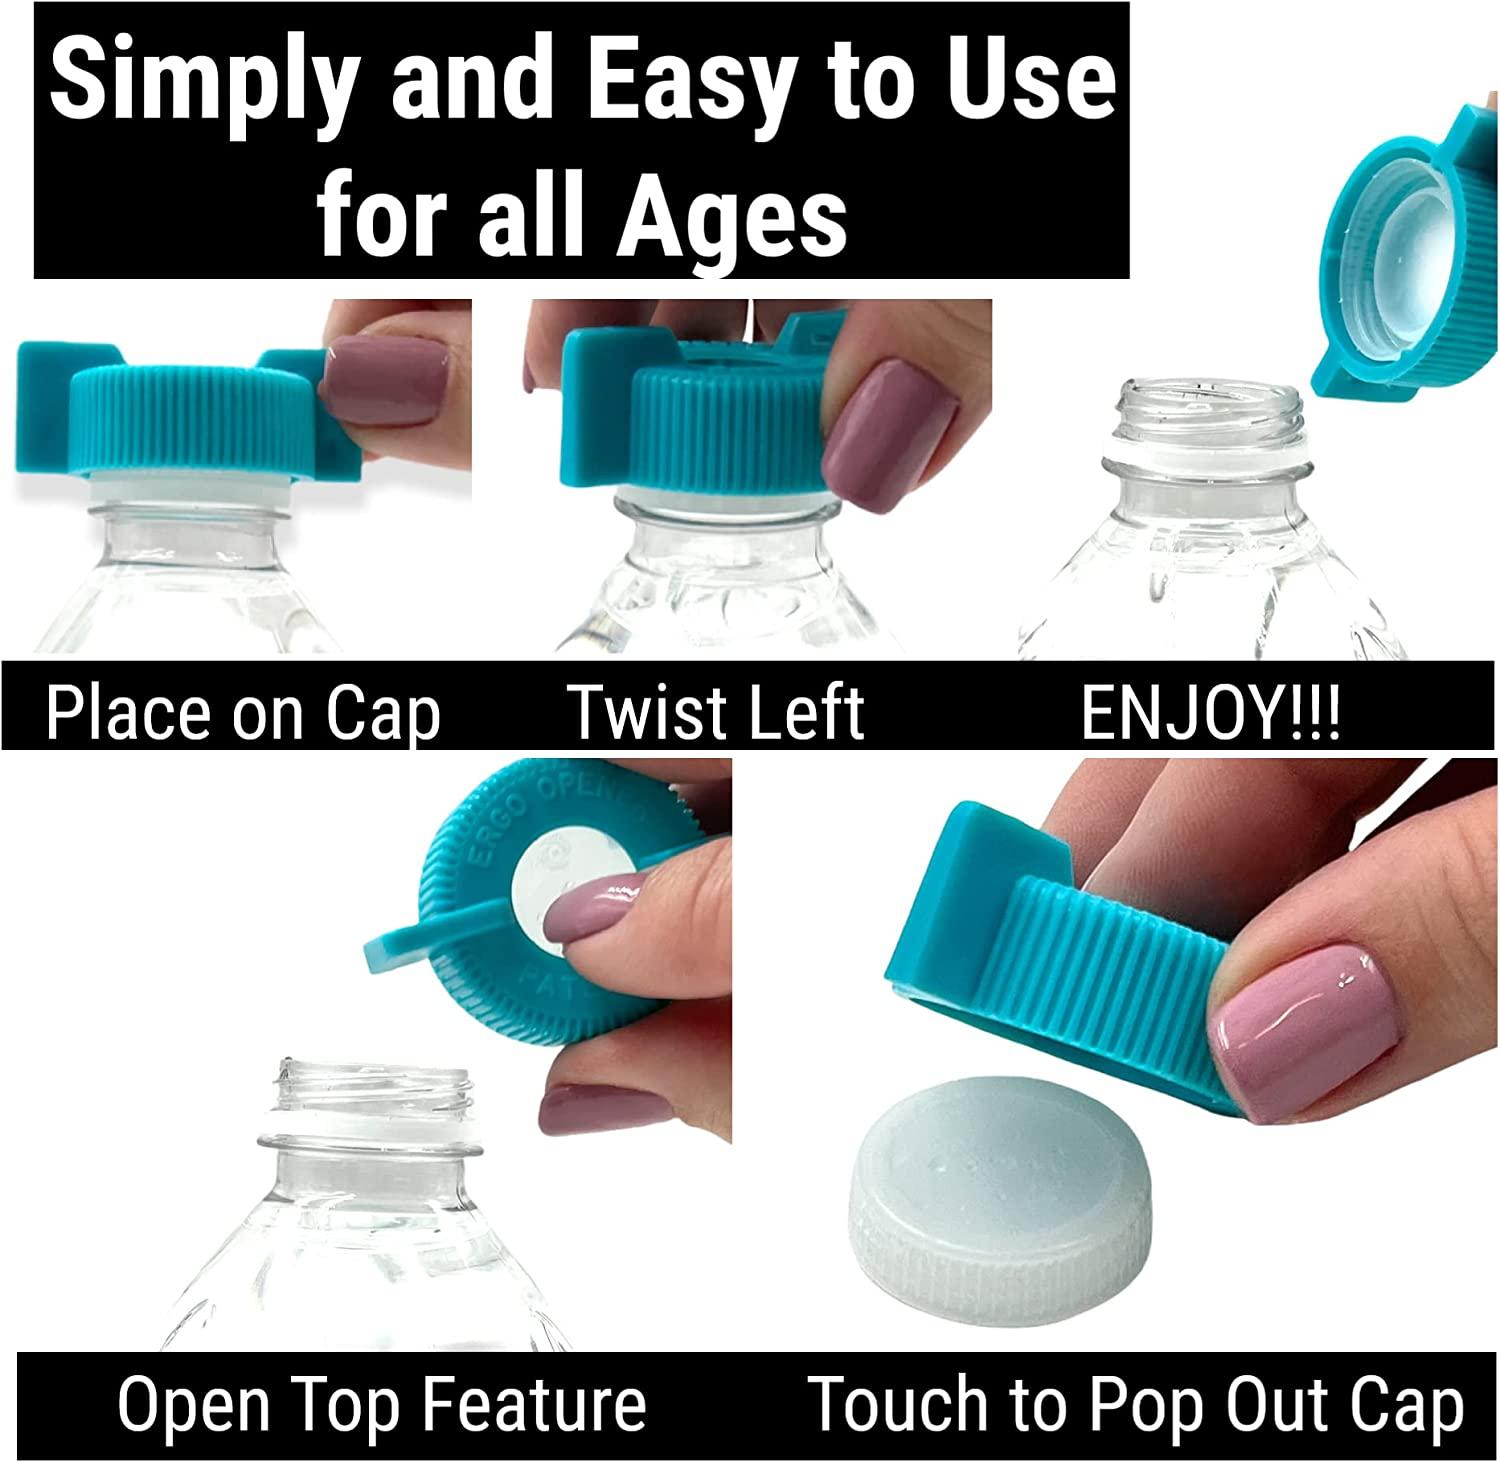 Undo-it Jar and Bottle Opener, designed for one hand operation. Mobility  aid for disabled, seniors, elderly, children, recovering from injury or  sick with arthritis.